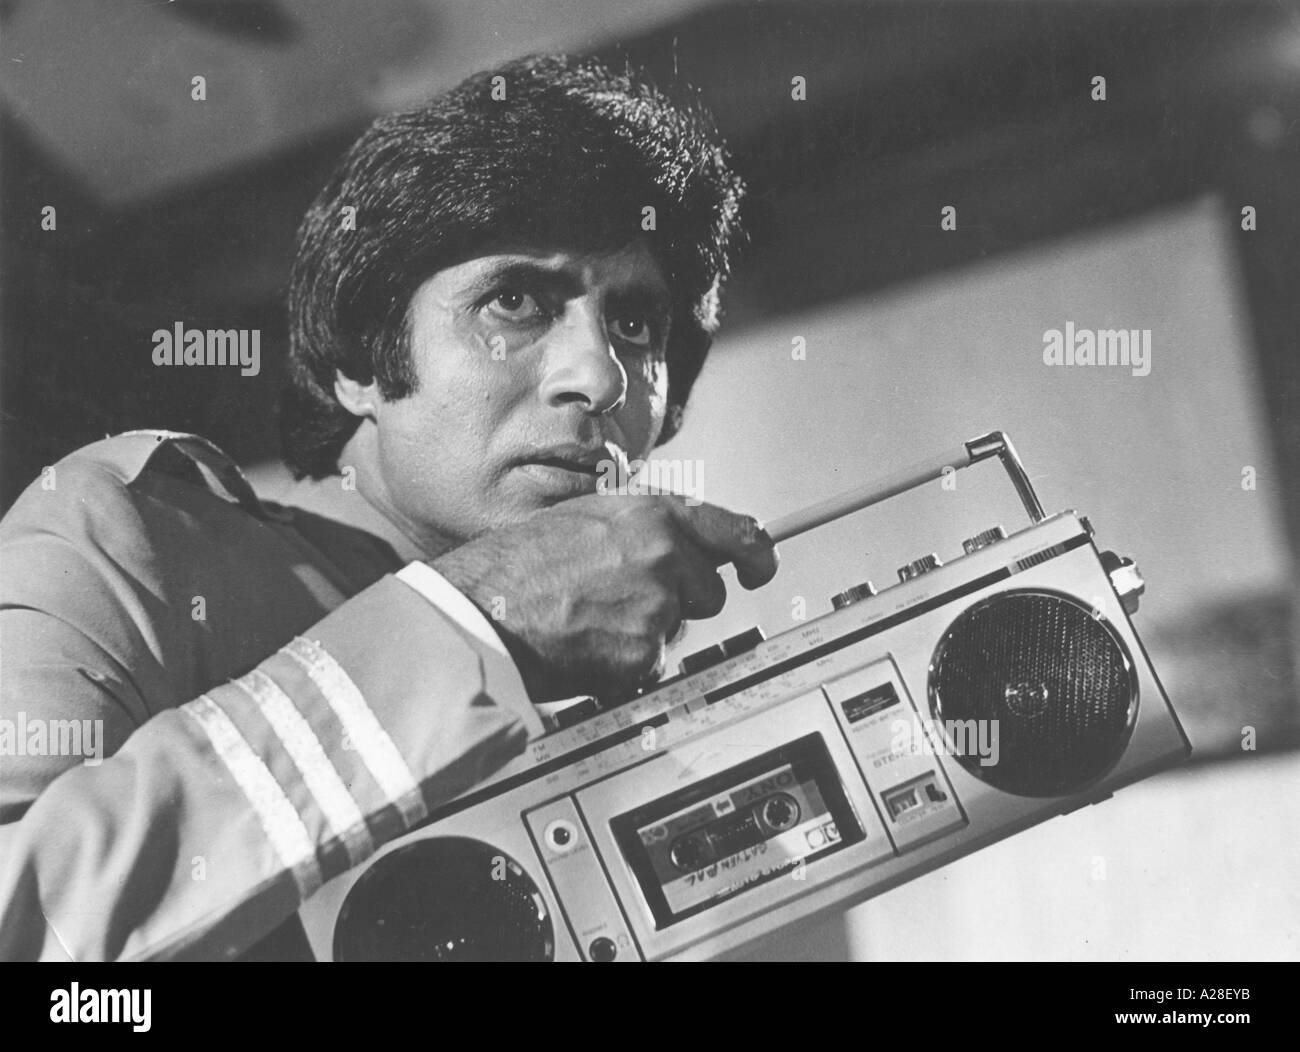 Amitabh Bachchan Indian film actor in the movie Muqaddar Ka Sikander with tape recorder India Asia old vintage 1900s picture Muqaddar Ka Sikandar Stock Photo